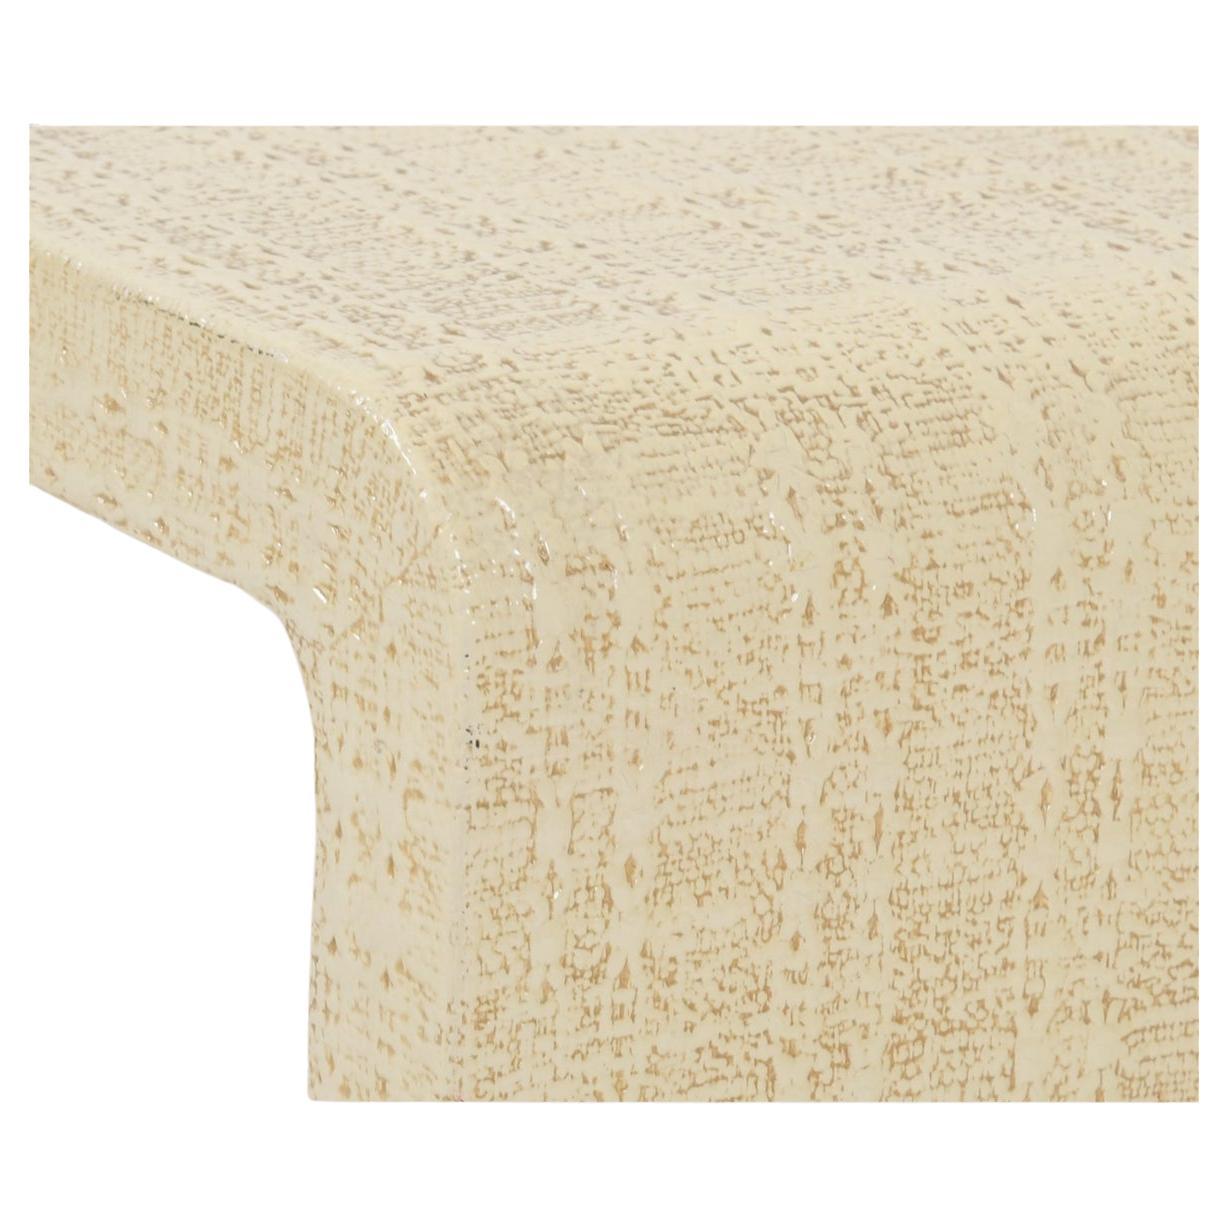 Italian Karl springer coffee table or bench textured solid cast resin  For Sale